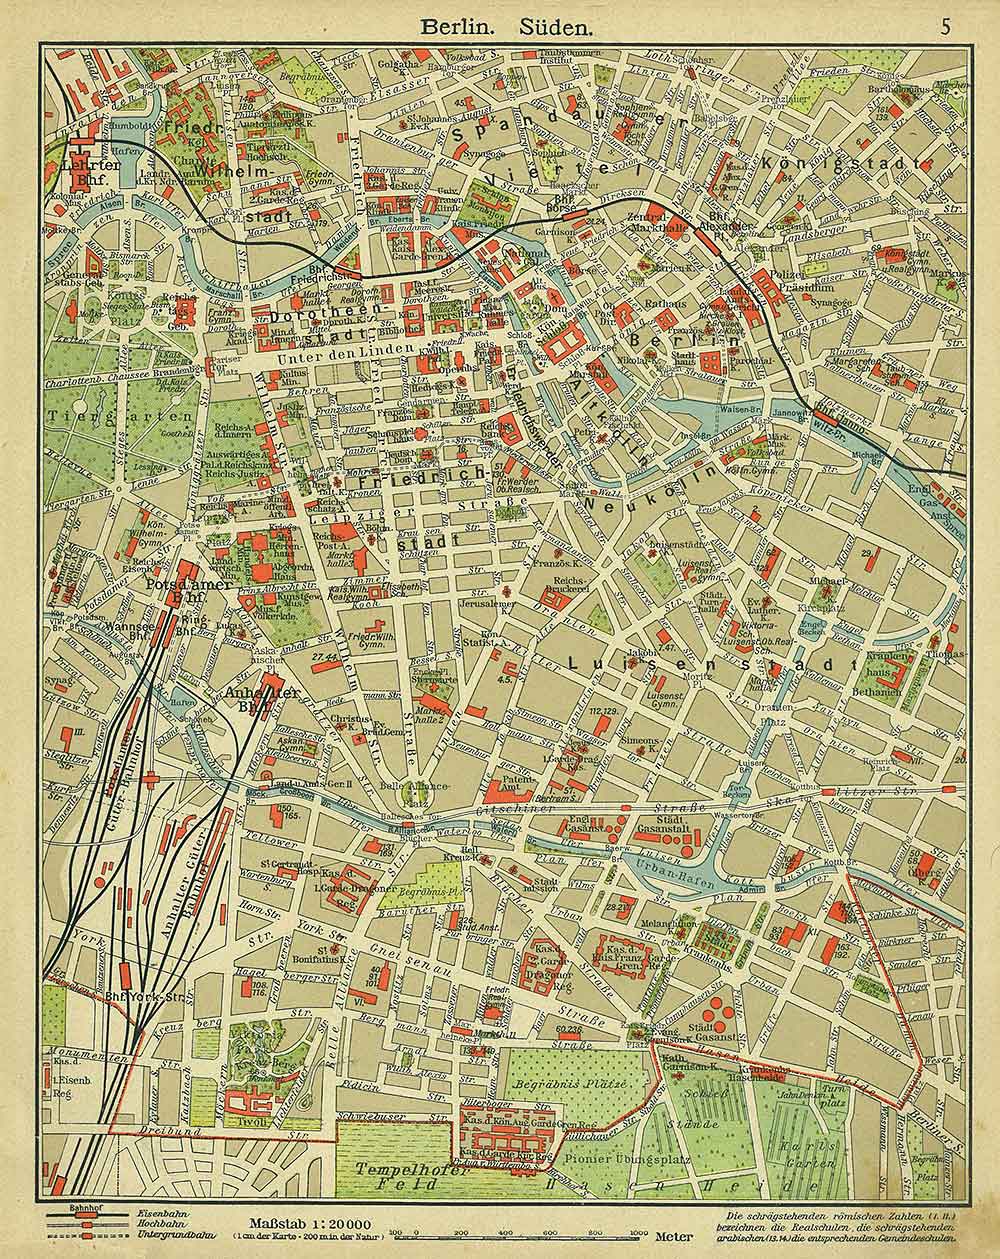 Berlin South, Andrees 'Berliner Schul-Atlas', 1916, page 5, published size to print borders 21.09 cm wide by 27.62 cm high.